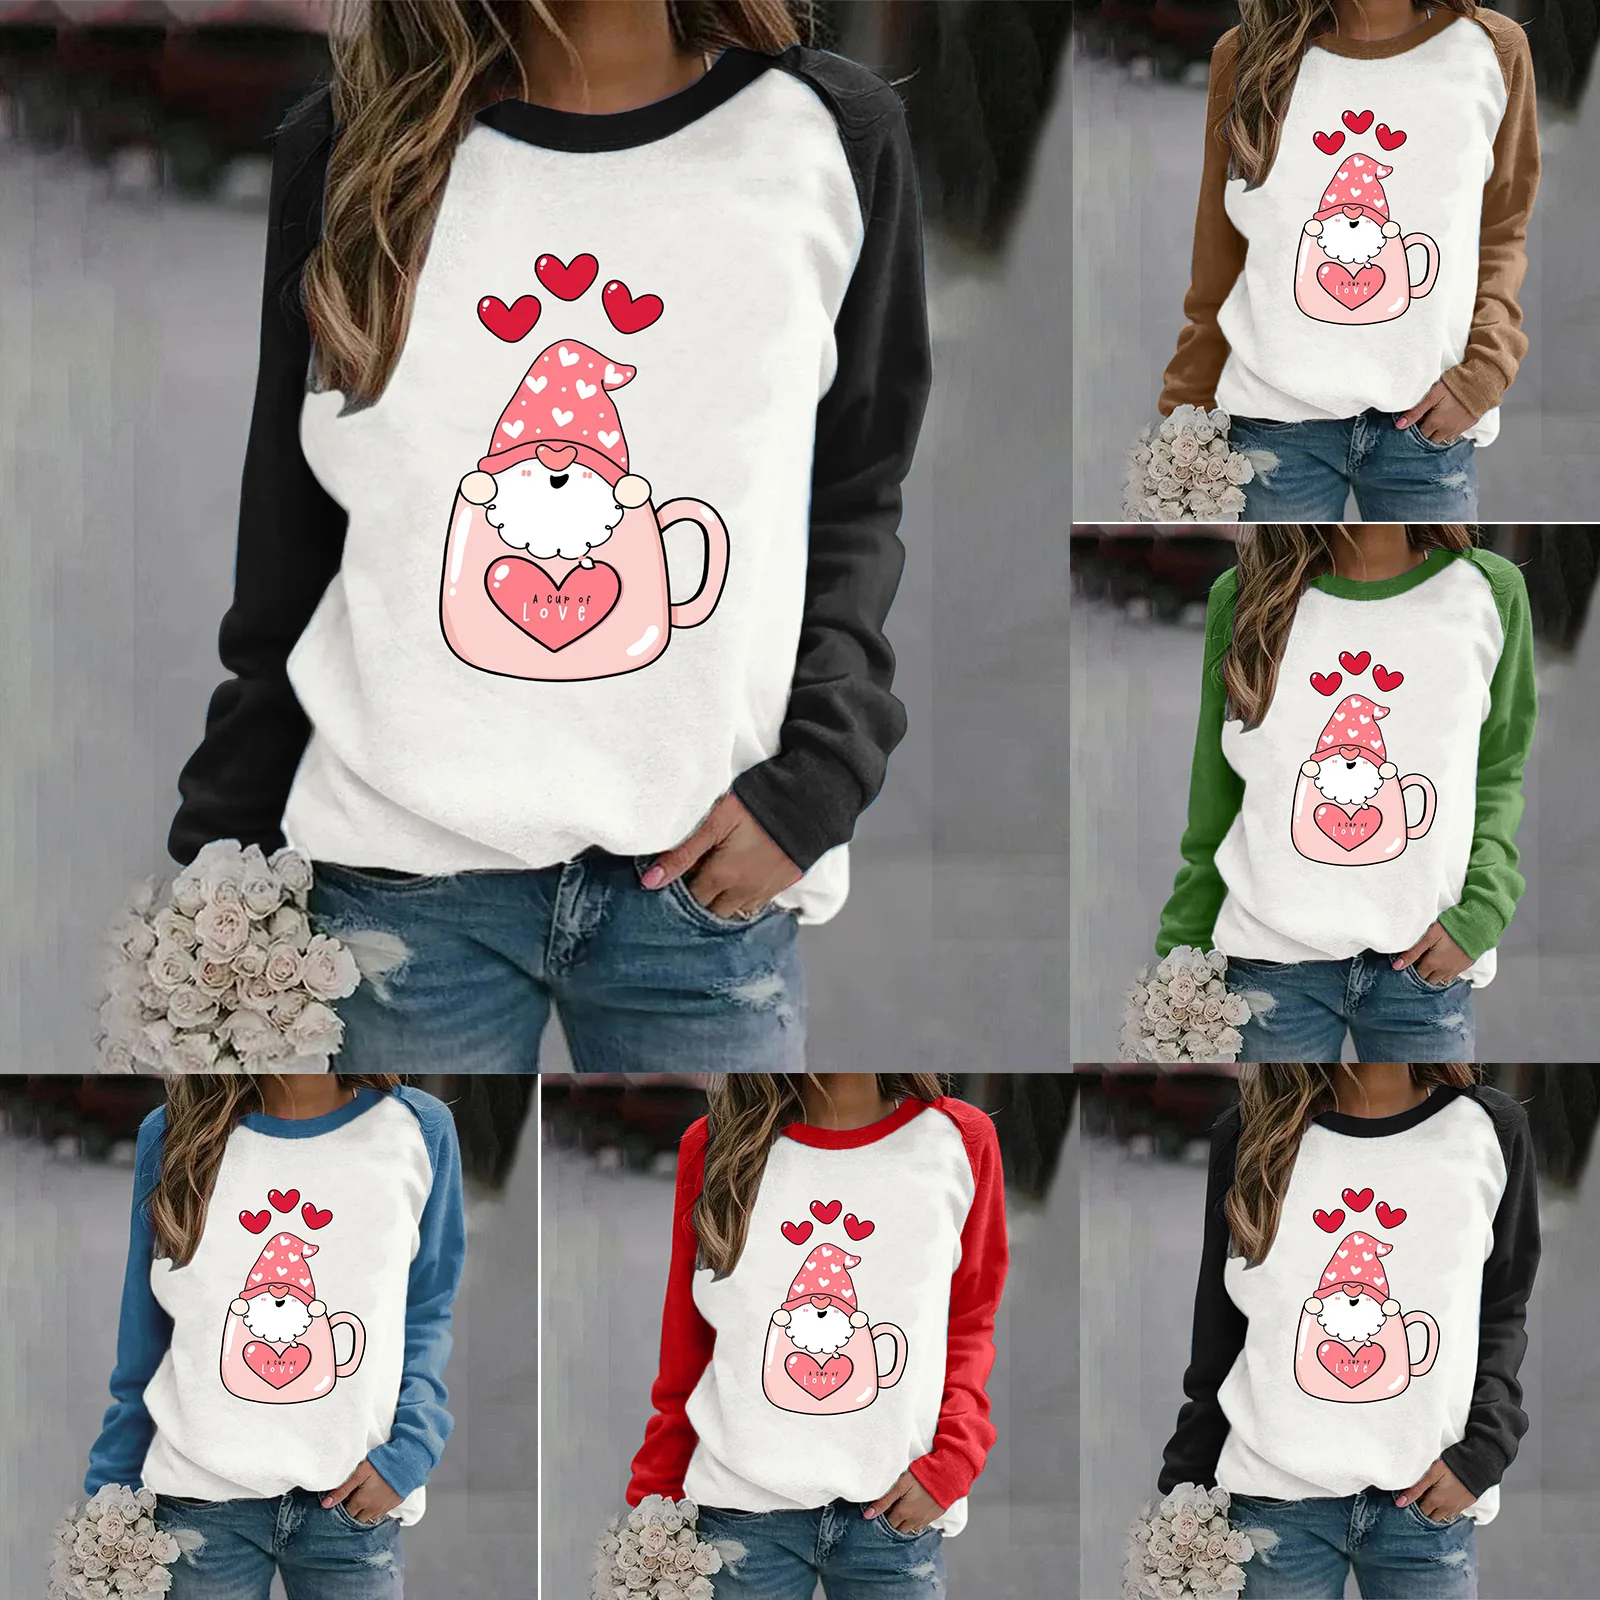 

Knit Tunic Tops Women Women's Valentine's Day Fun Print Raglan Sleeves Round Neck Hatless Casual Hoodie Women S Quilted Pullover